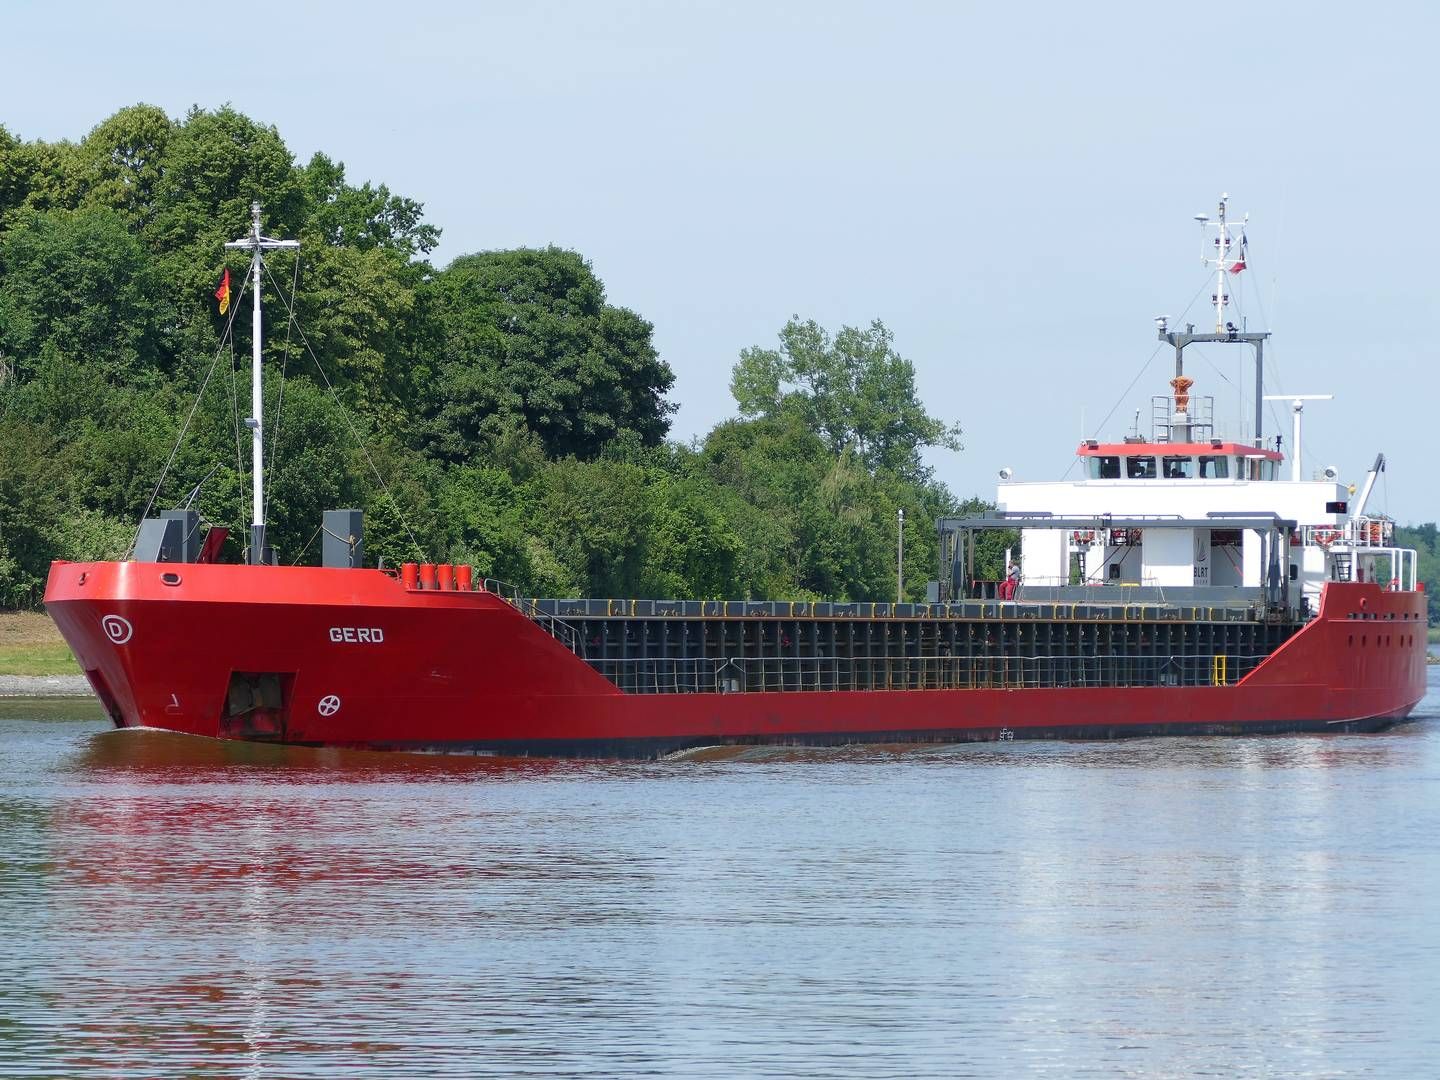 The 28-year-old bulker "Gerd" was retained in 2020 at a Danish port, because it lacked sufficient food stock for its crew. This restriction came about due to control from the Danish Maritime Authority. | Photo: fotograf: Hans-peter Schröder